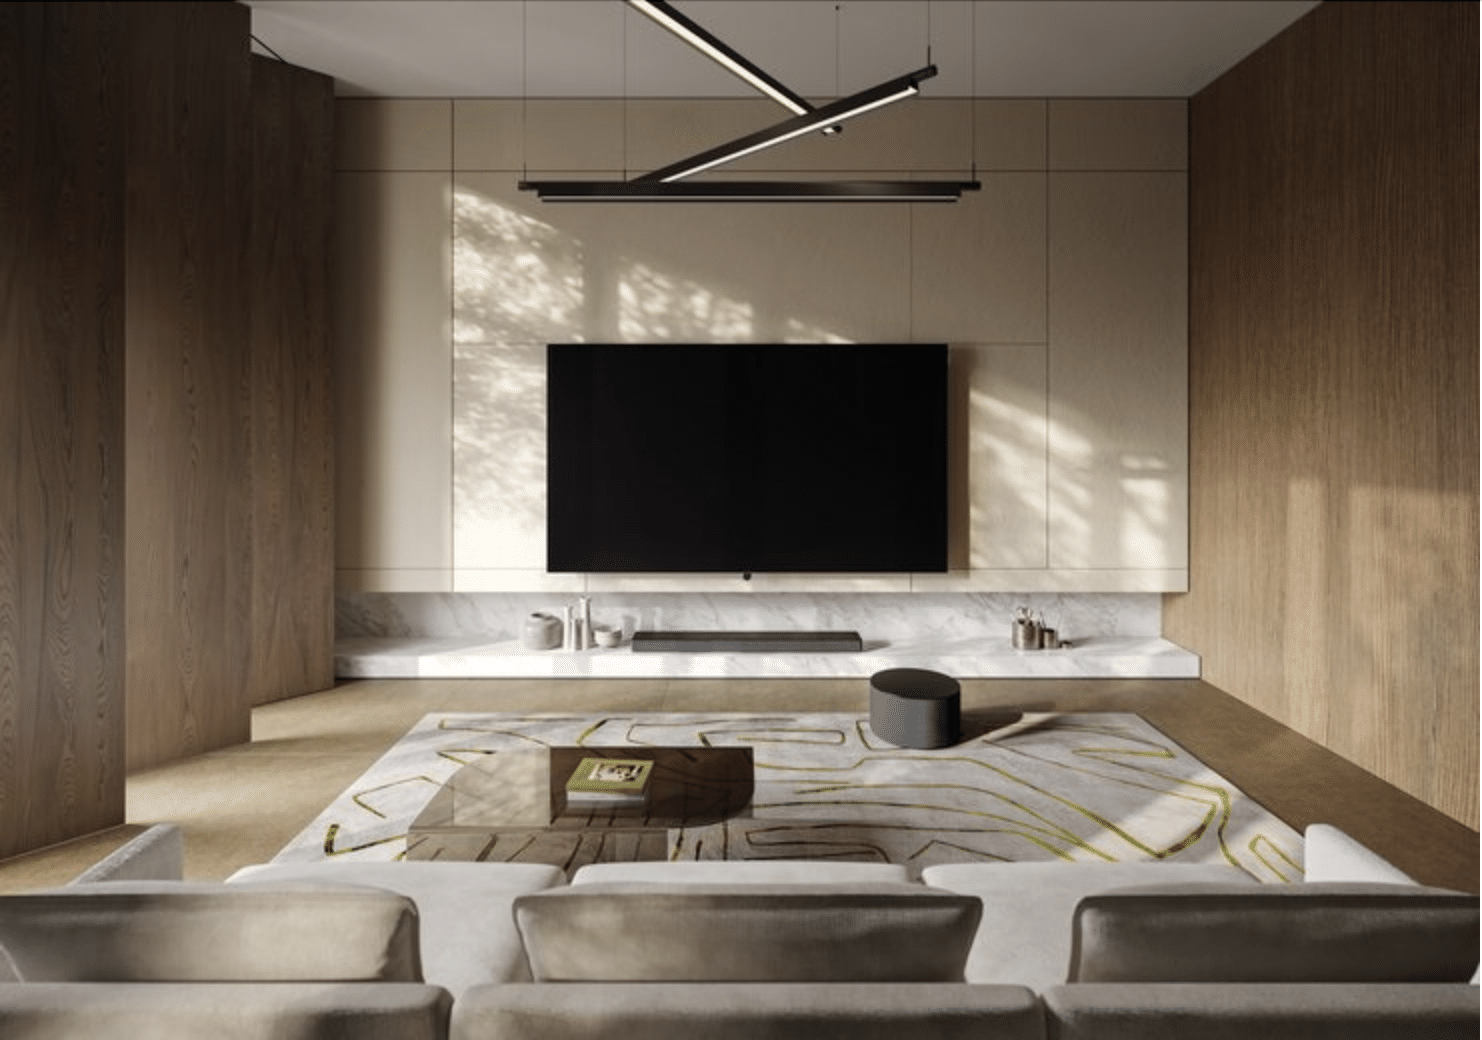 The largest OLED TV from Loewe to date